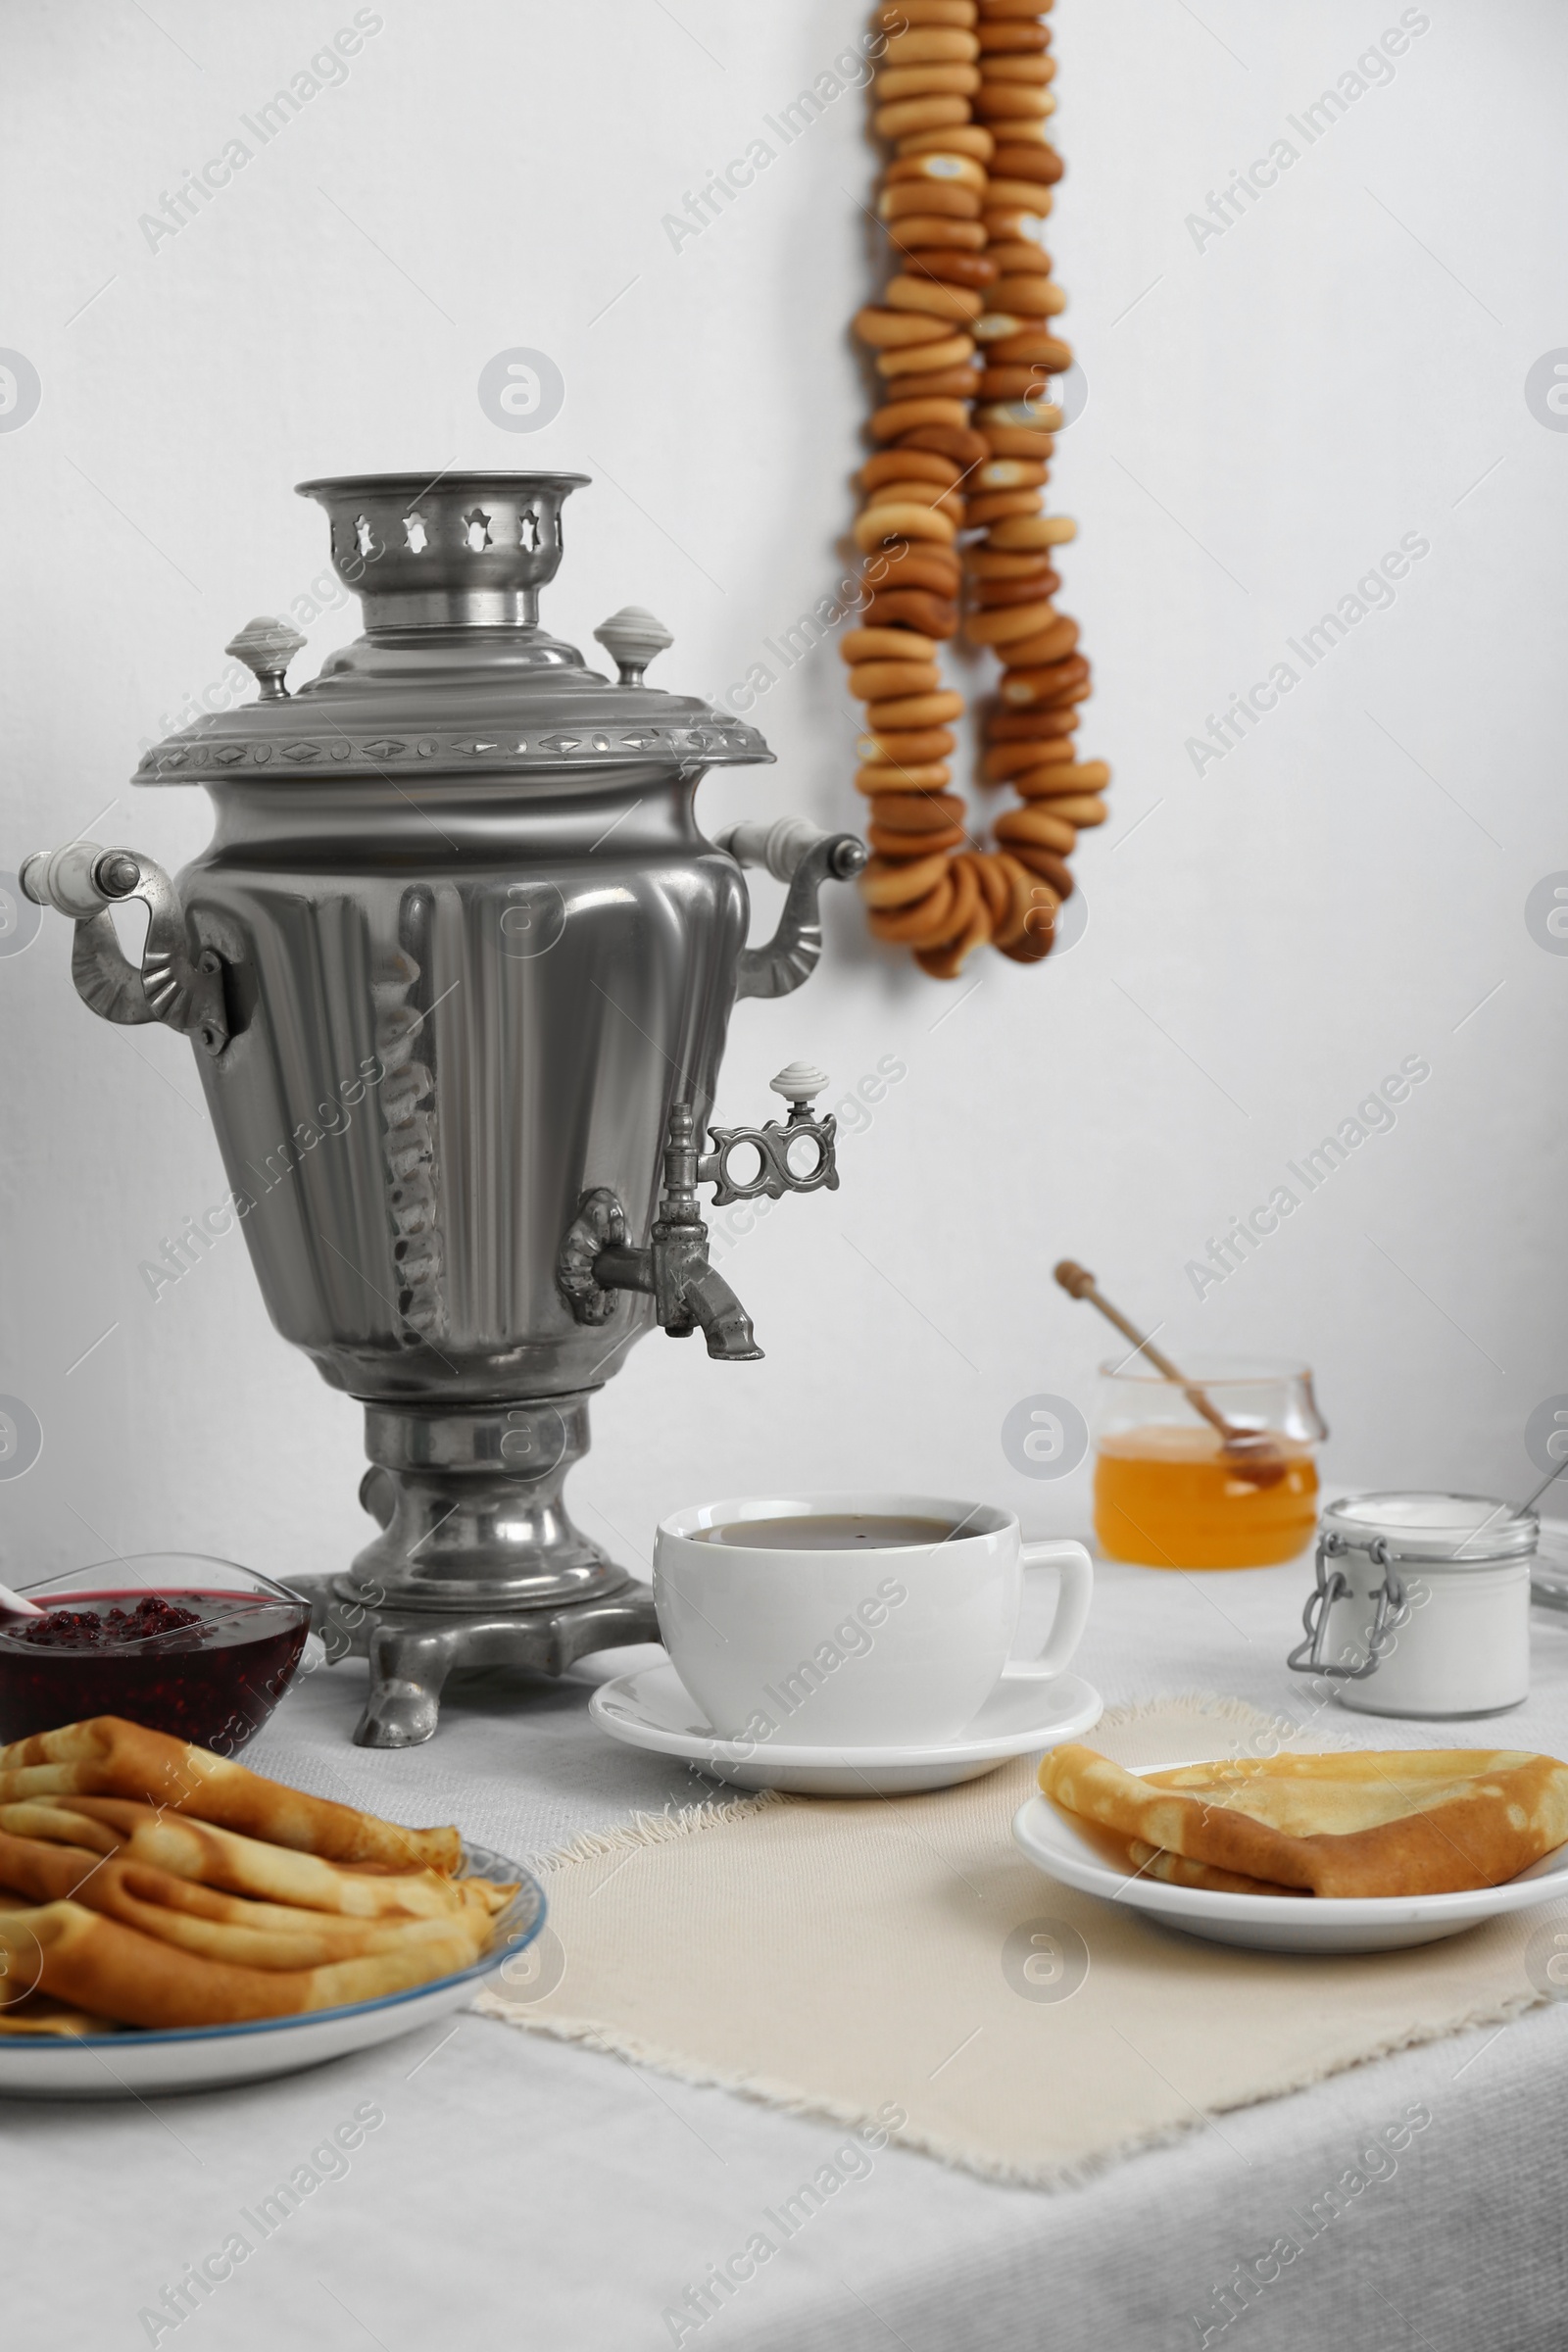 Photo of Vintage samovar, cup of hot drink and snacks served on table. Traditional Russian tea ceremony